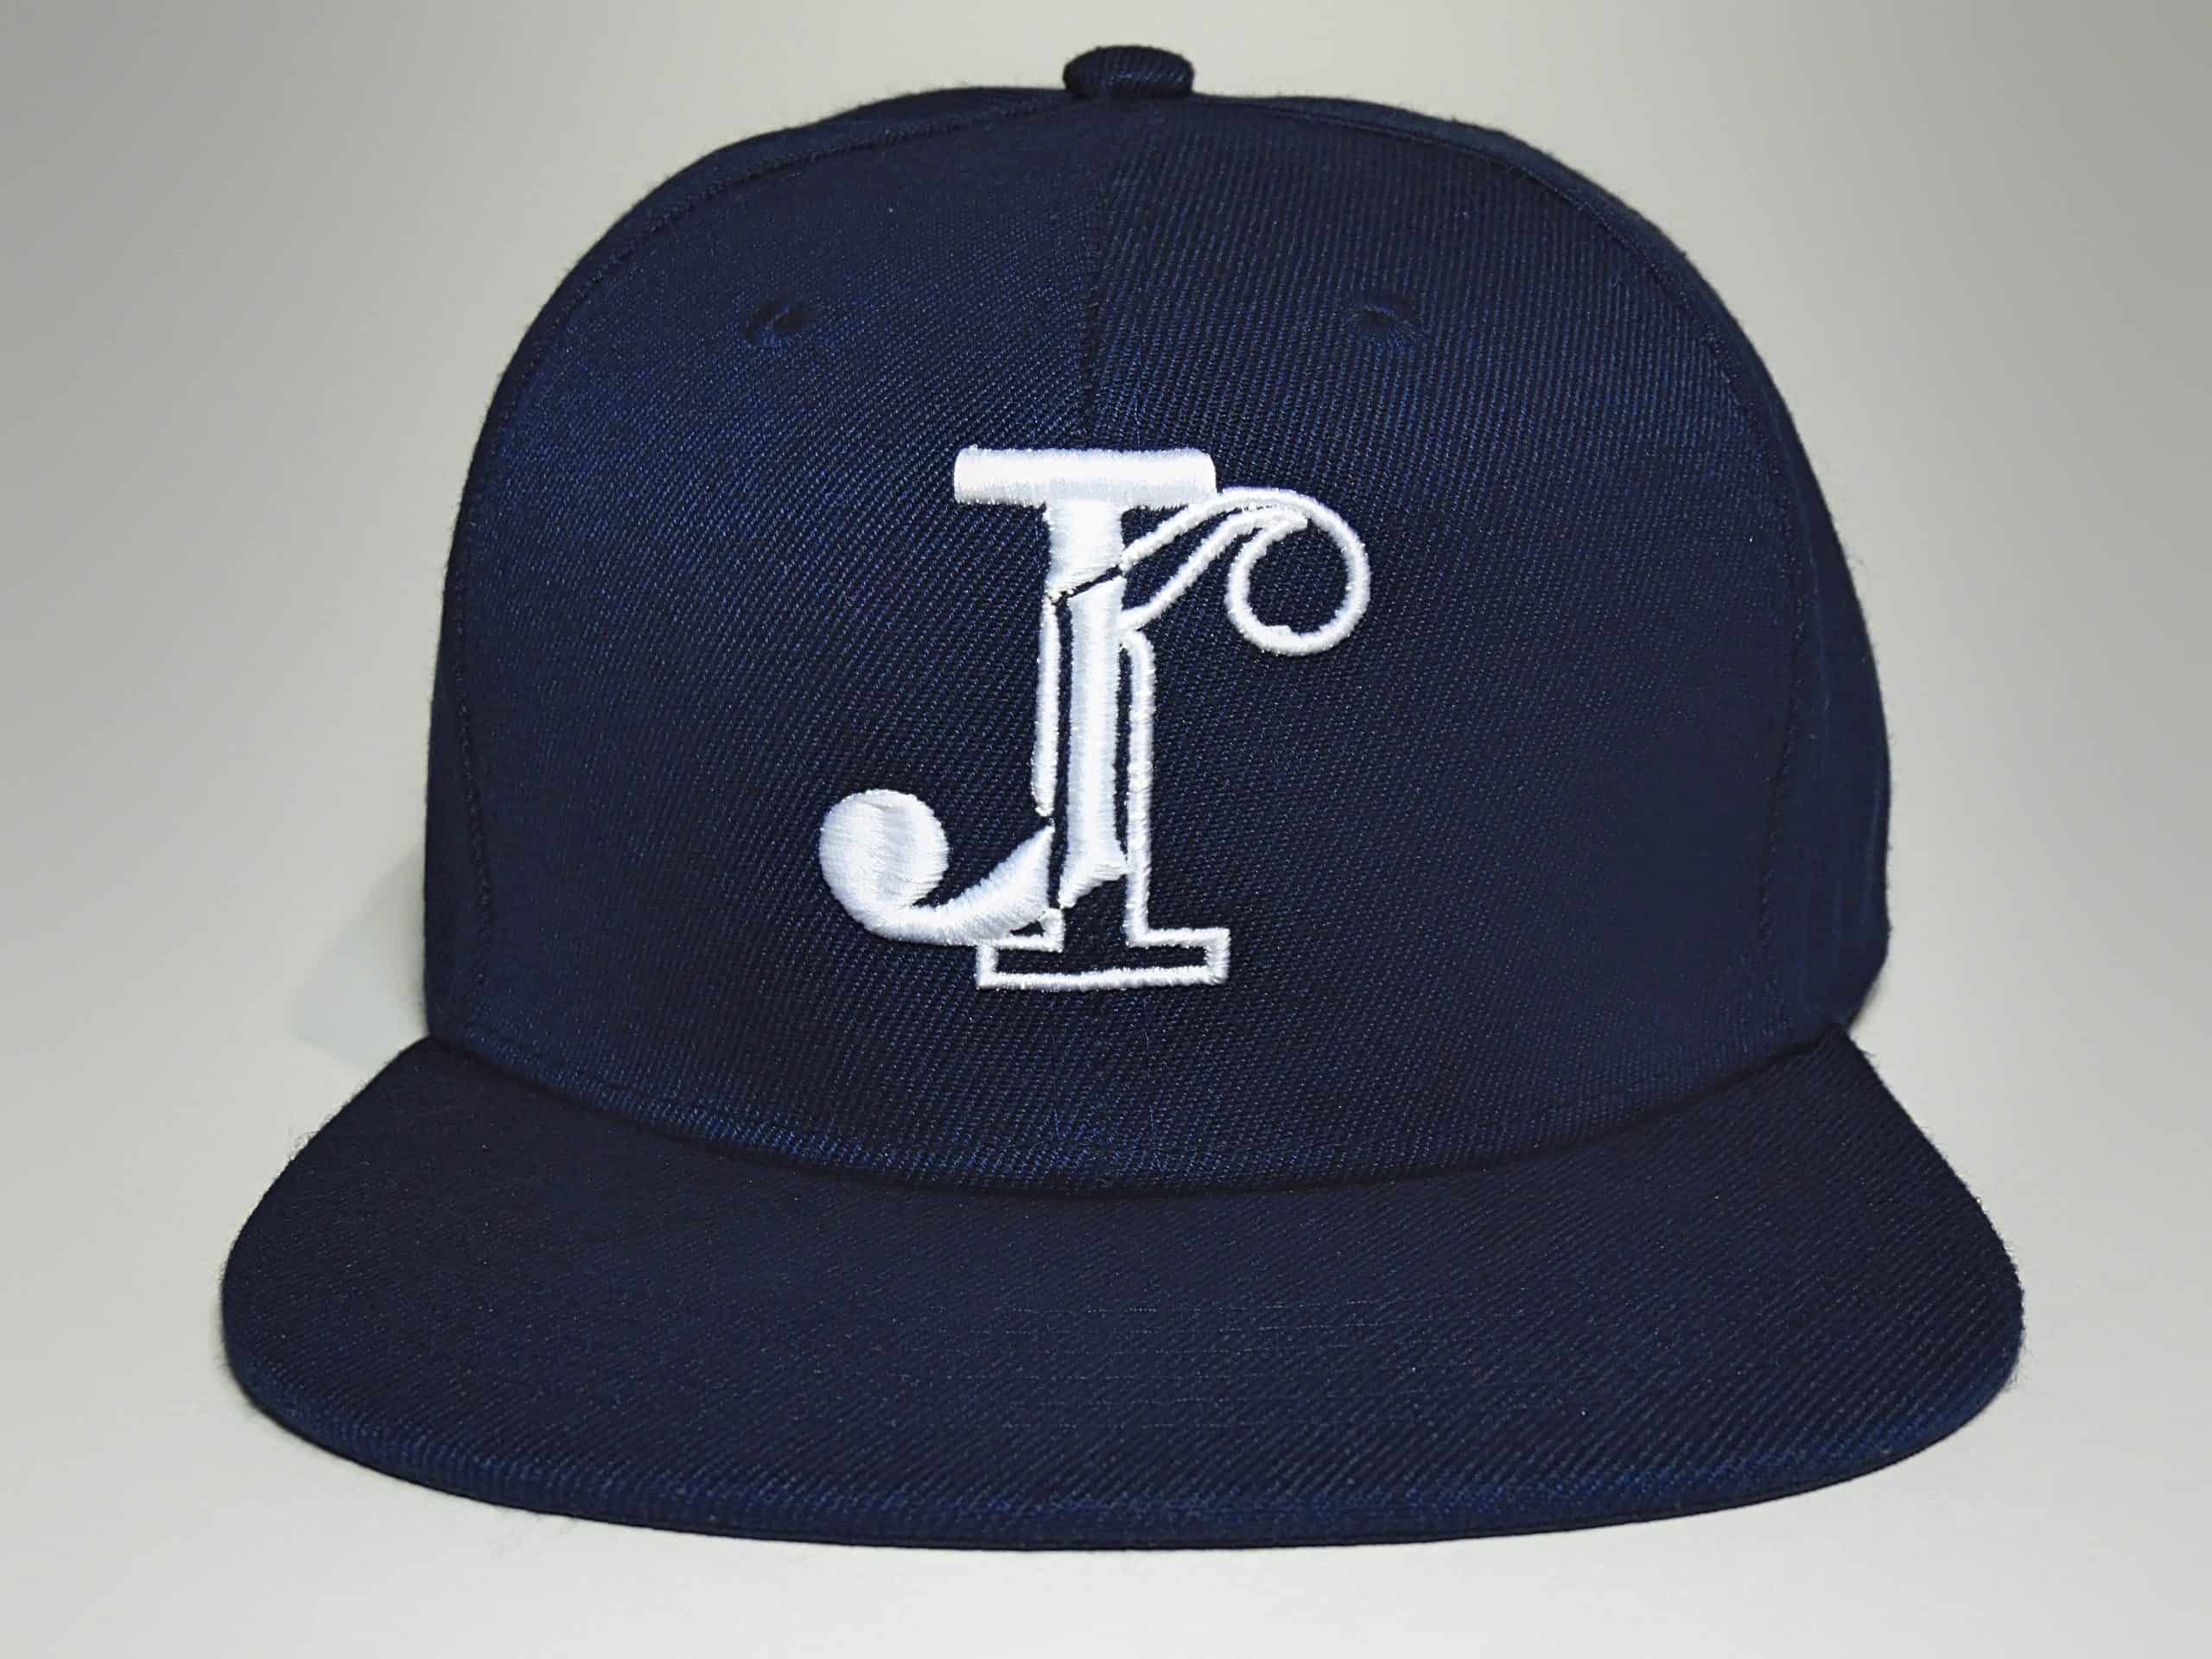 Blue Navy with White Snapback lettering, Jean-Jacques Cap Baseball